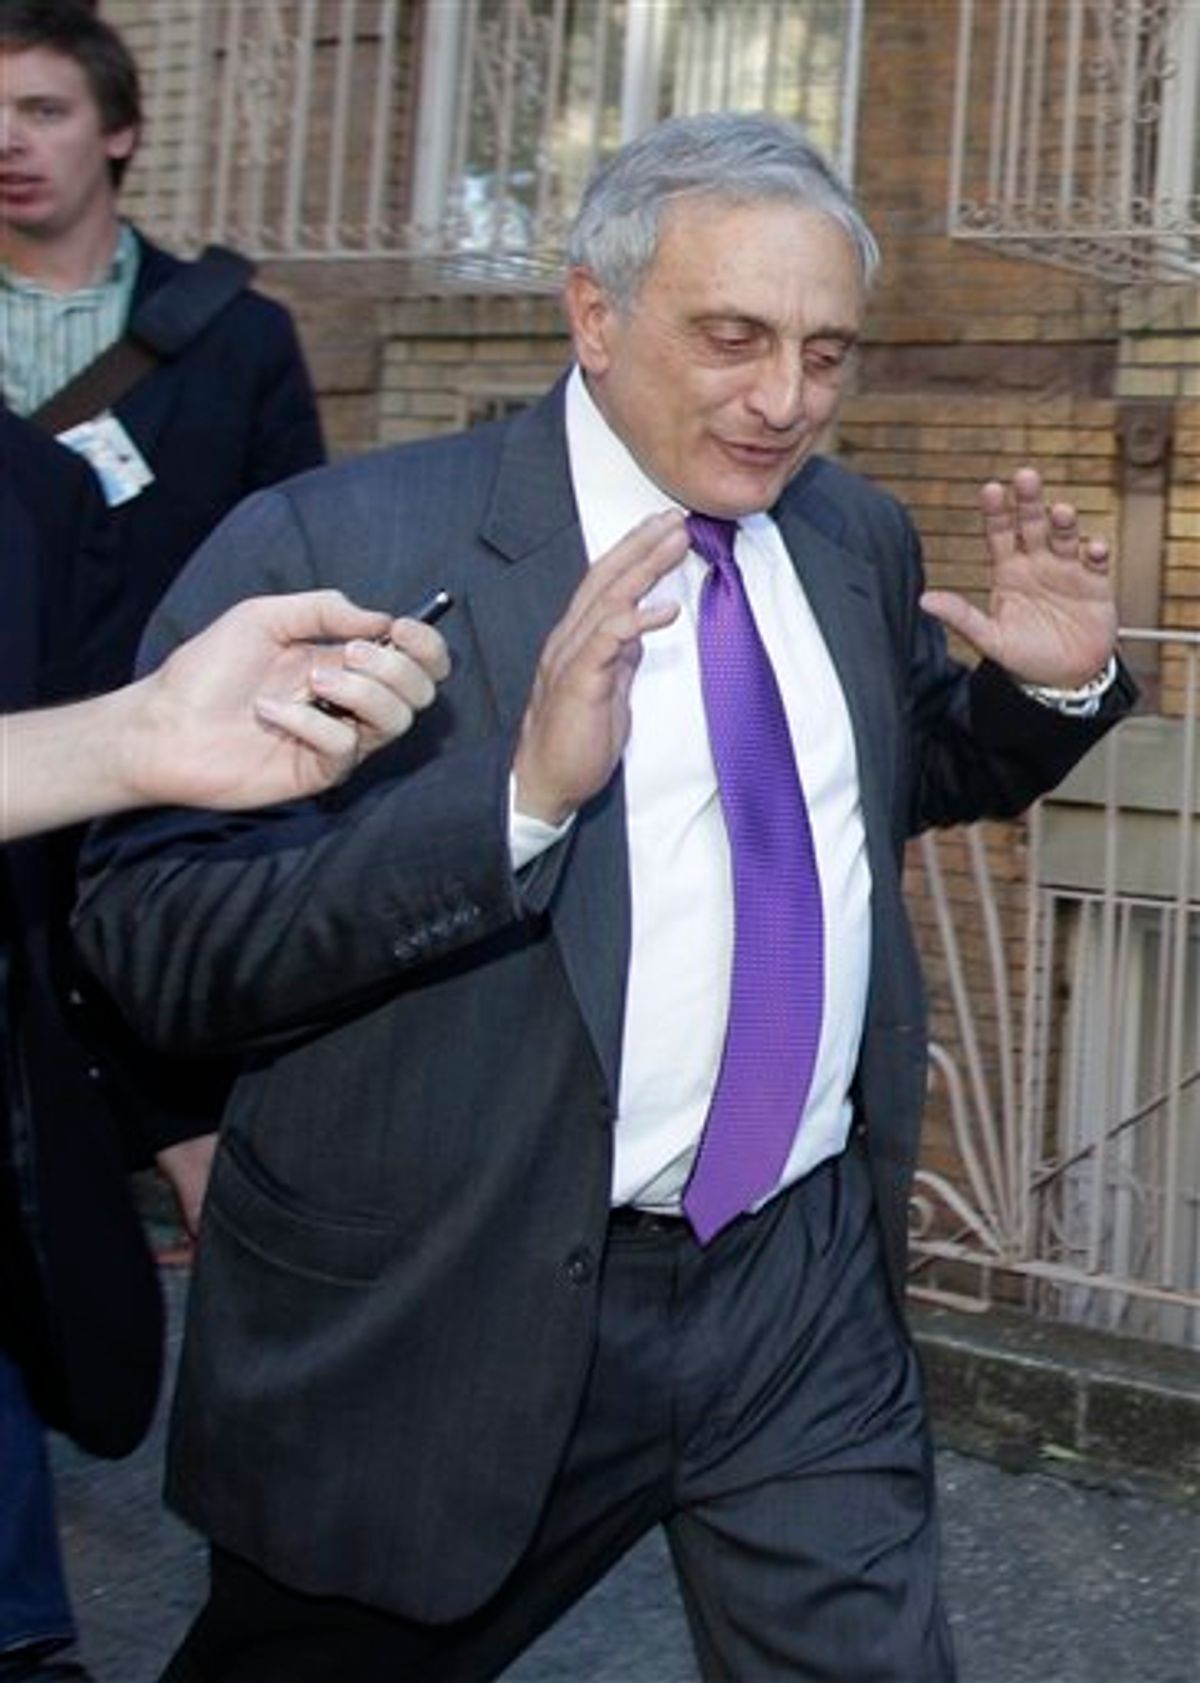 New York Republican gubernatorial candidate Carl Paladino gestures after a reporter's question about prior controversial remarks while campaigning in the Borough Park and Williamsburg sections of the Brooklyn borough of New York, Sunday, Oct. 10, 2010. (AP Photo/Kathy Willens) (AP)